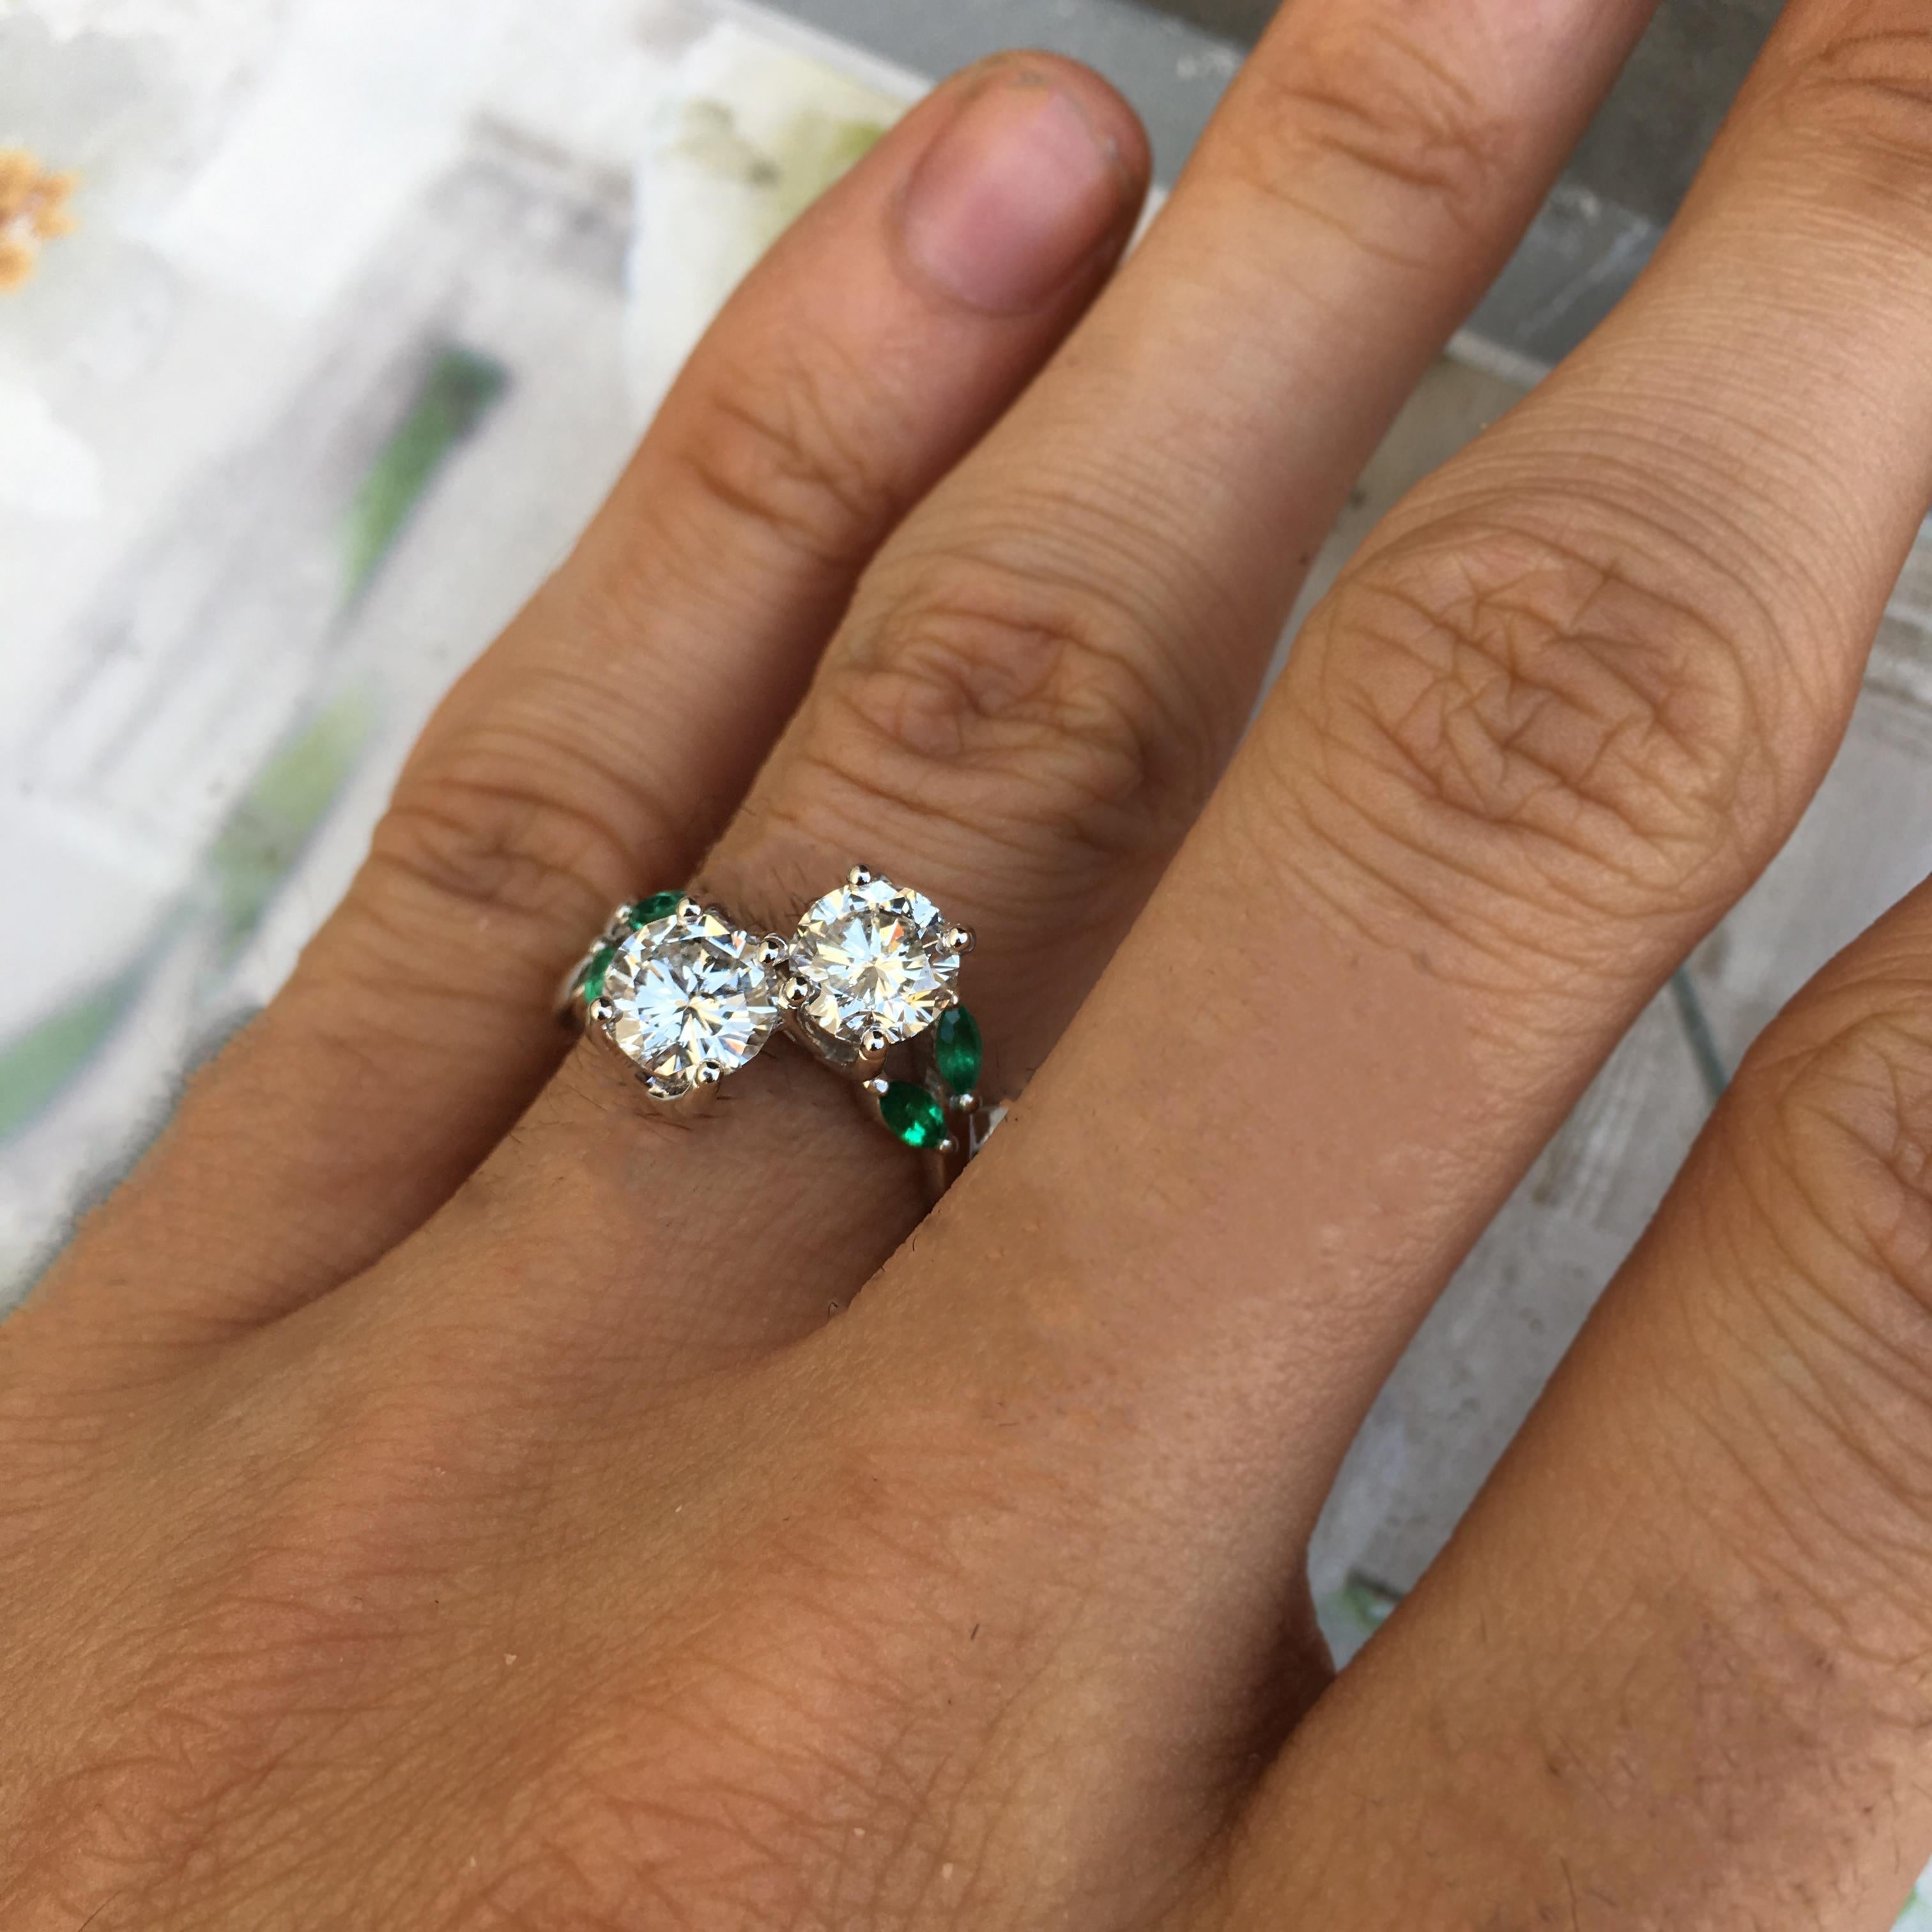 Can be sized to any finger size, ring will be made to order and take approximately  3- 6 business weeks. If you need a sooner date let us know and we will see if we can accommodate you.

Price is for ring as shown, you can adjust size of stones or